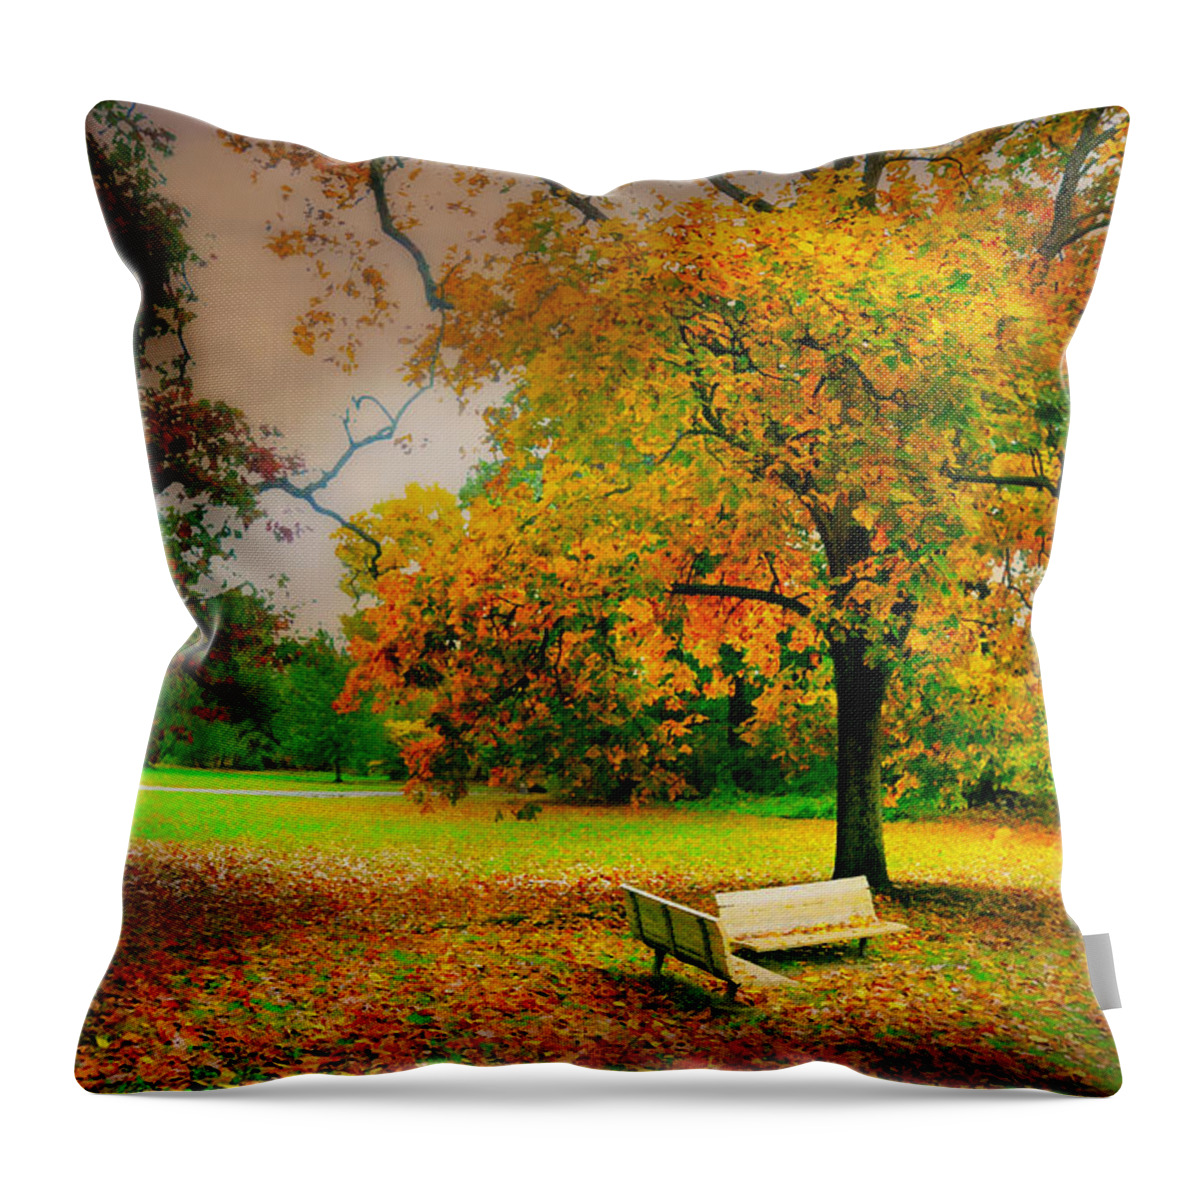 Matters To Me Throw Pillow featuring the photograph Matters To Me by Diana Angstadt